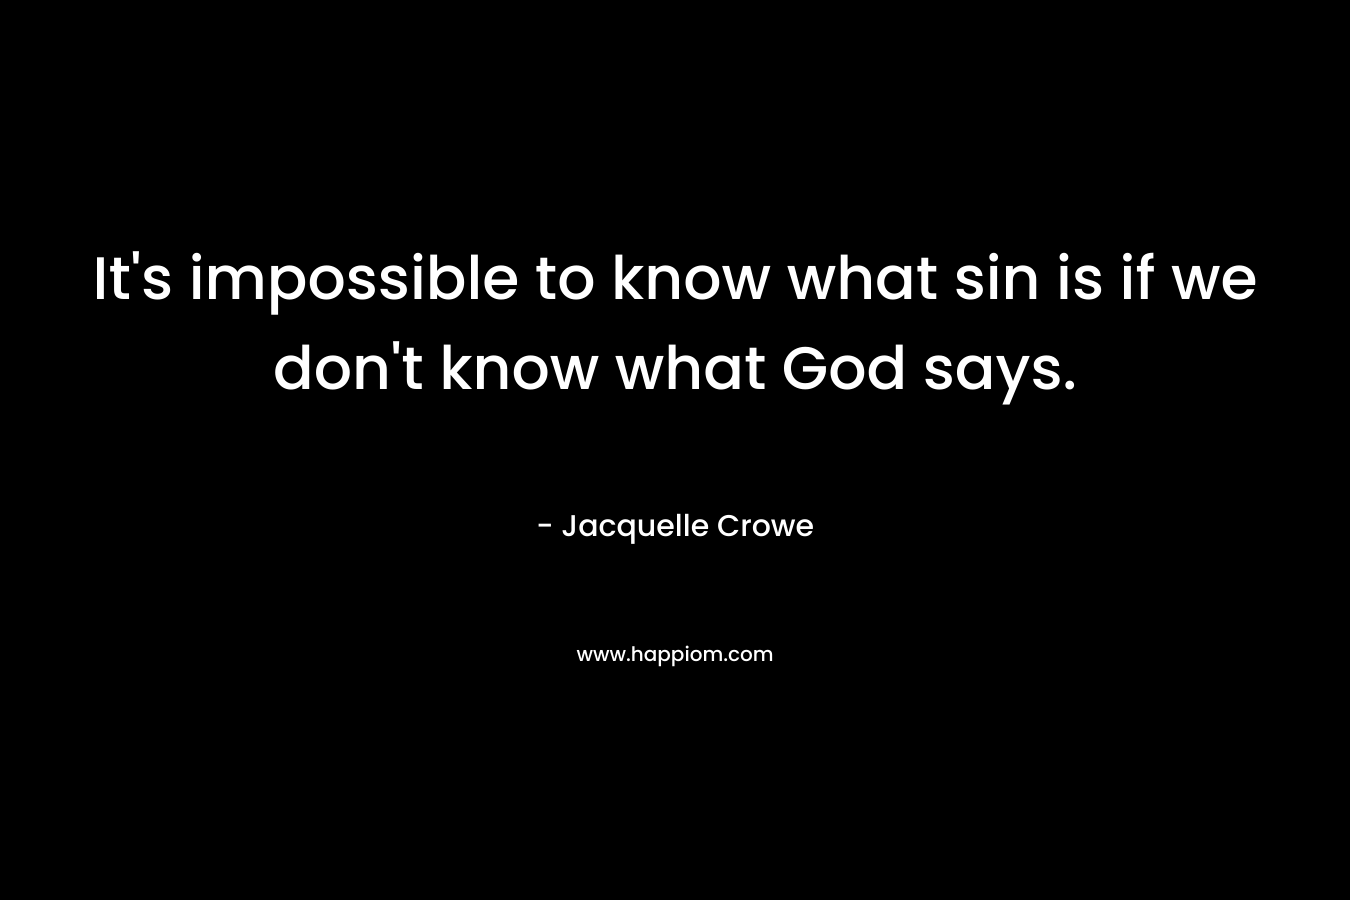 It's impossible to know what sin is if we don't know what God says.